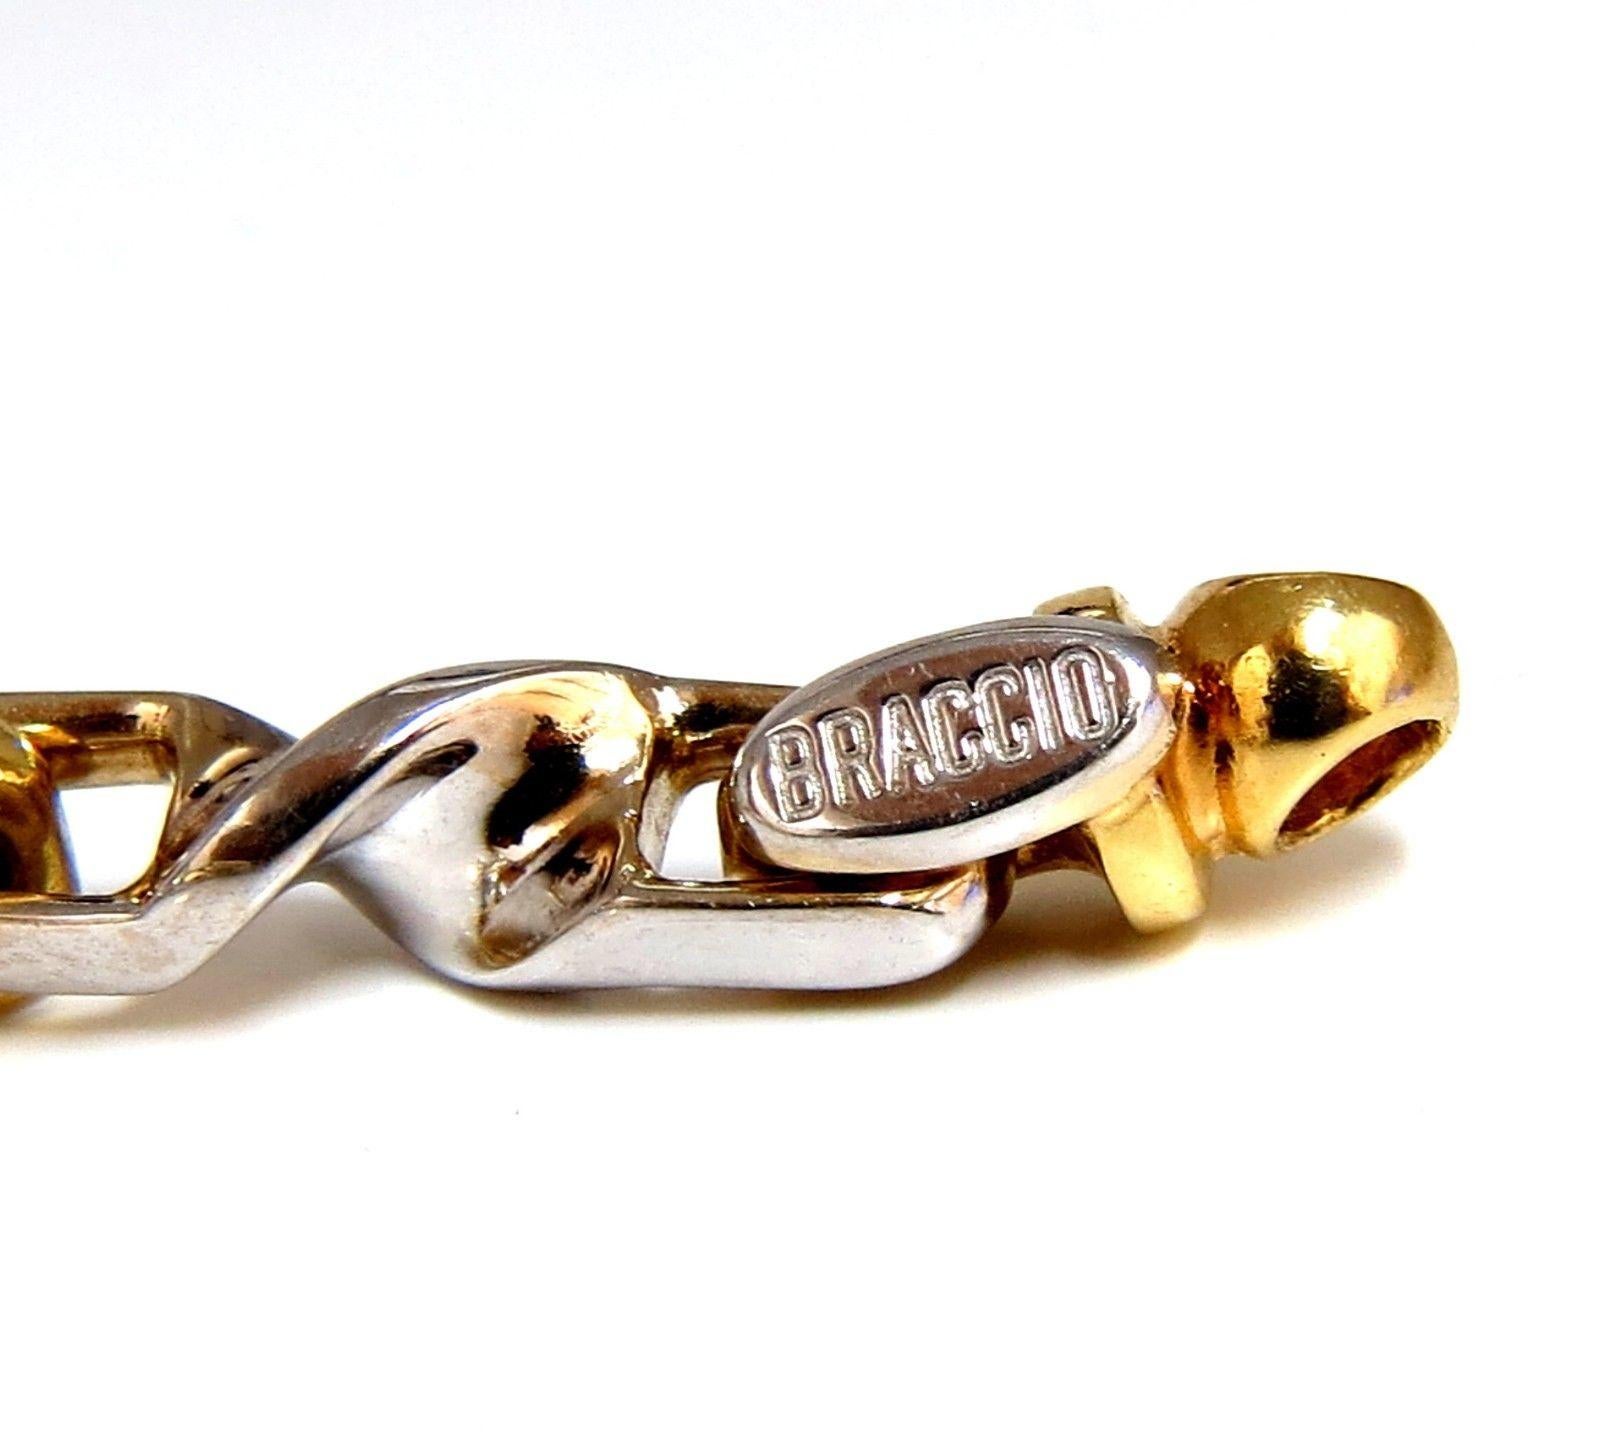 Designer: Braccio

 Two Toned Unisex Bracelet

Mod Deco

Smooth & High Shine

Unique Elongated Twisted Links

8 inch / wearable length

Comfortable locking / rotating clasp

40 Grams.

6.3mm wide

18kt yellow / white Gold.

Secure & Comfortable clasp